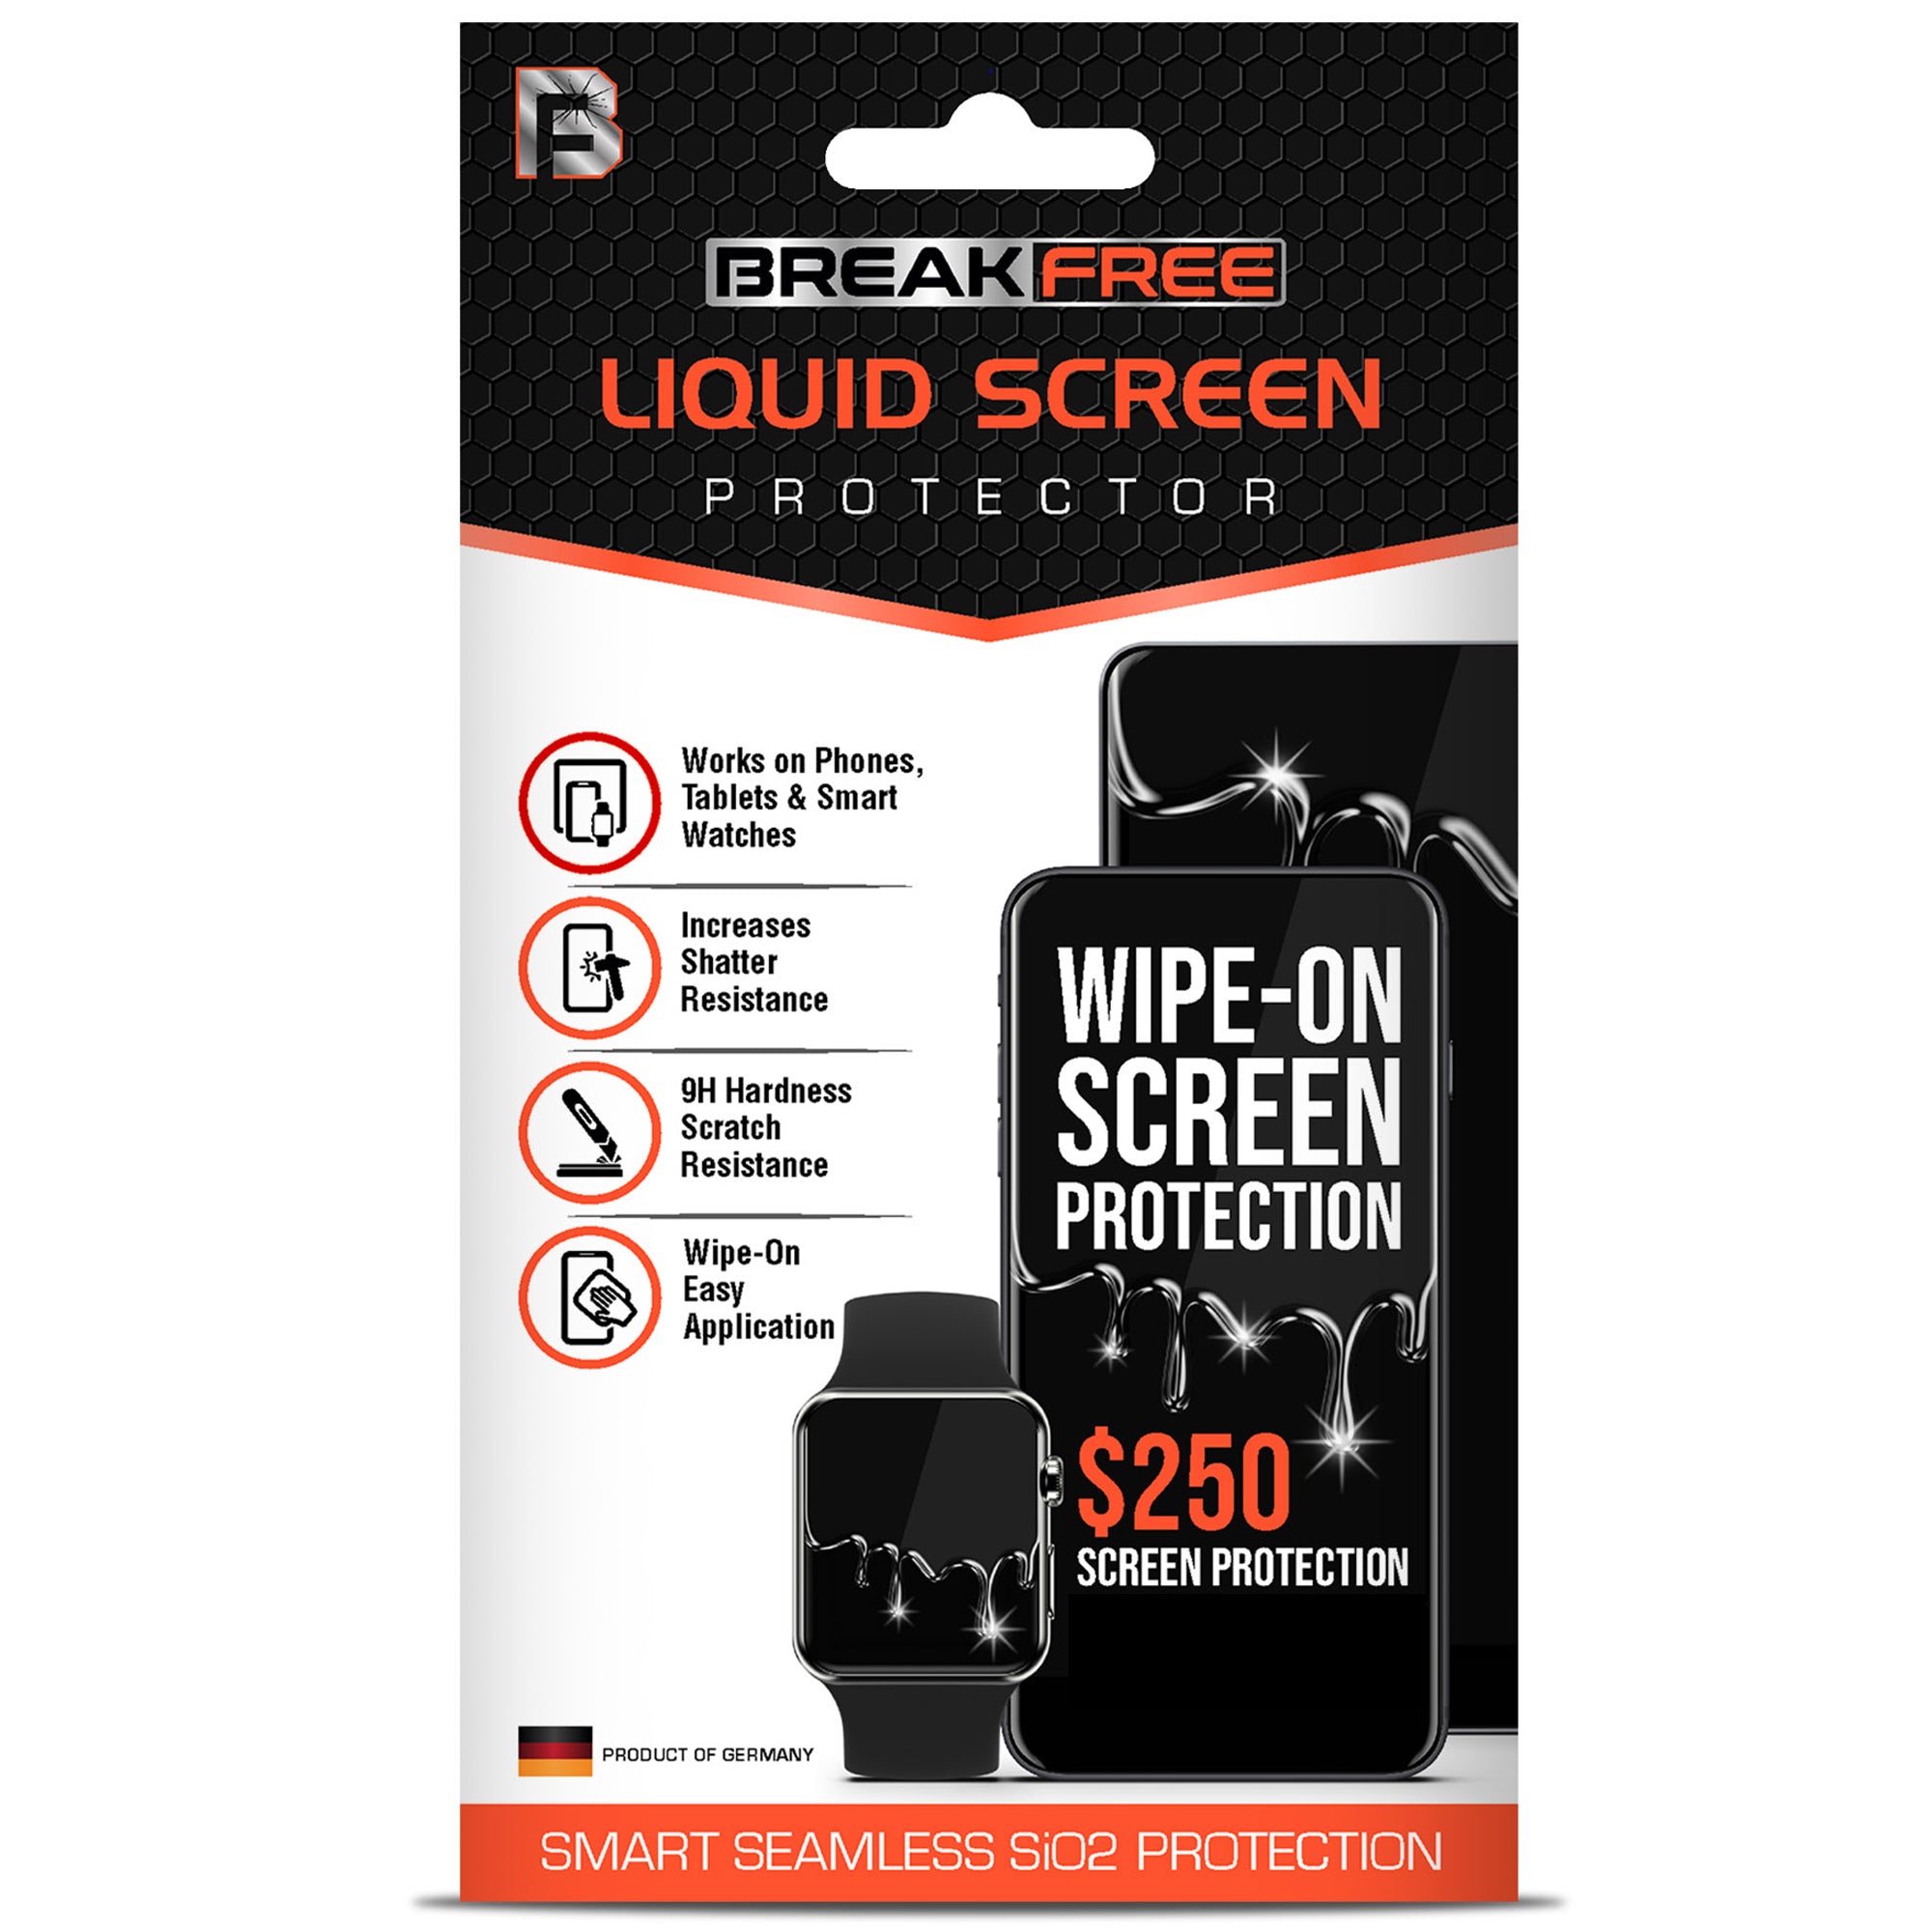 BREAK FREE Liquid Glass Screen Protector with $250 Guarantee for All Phones Tablets and Smart Watches